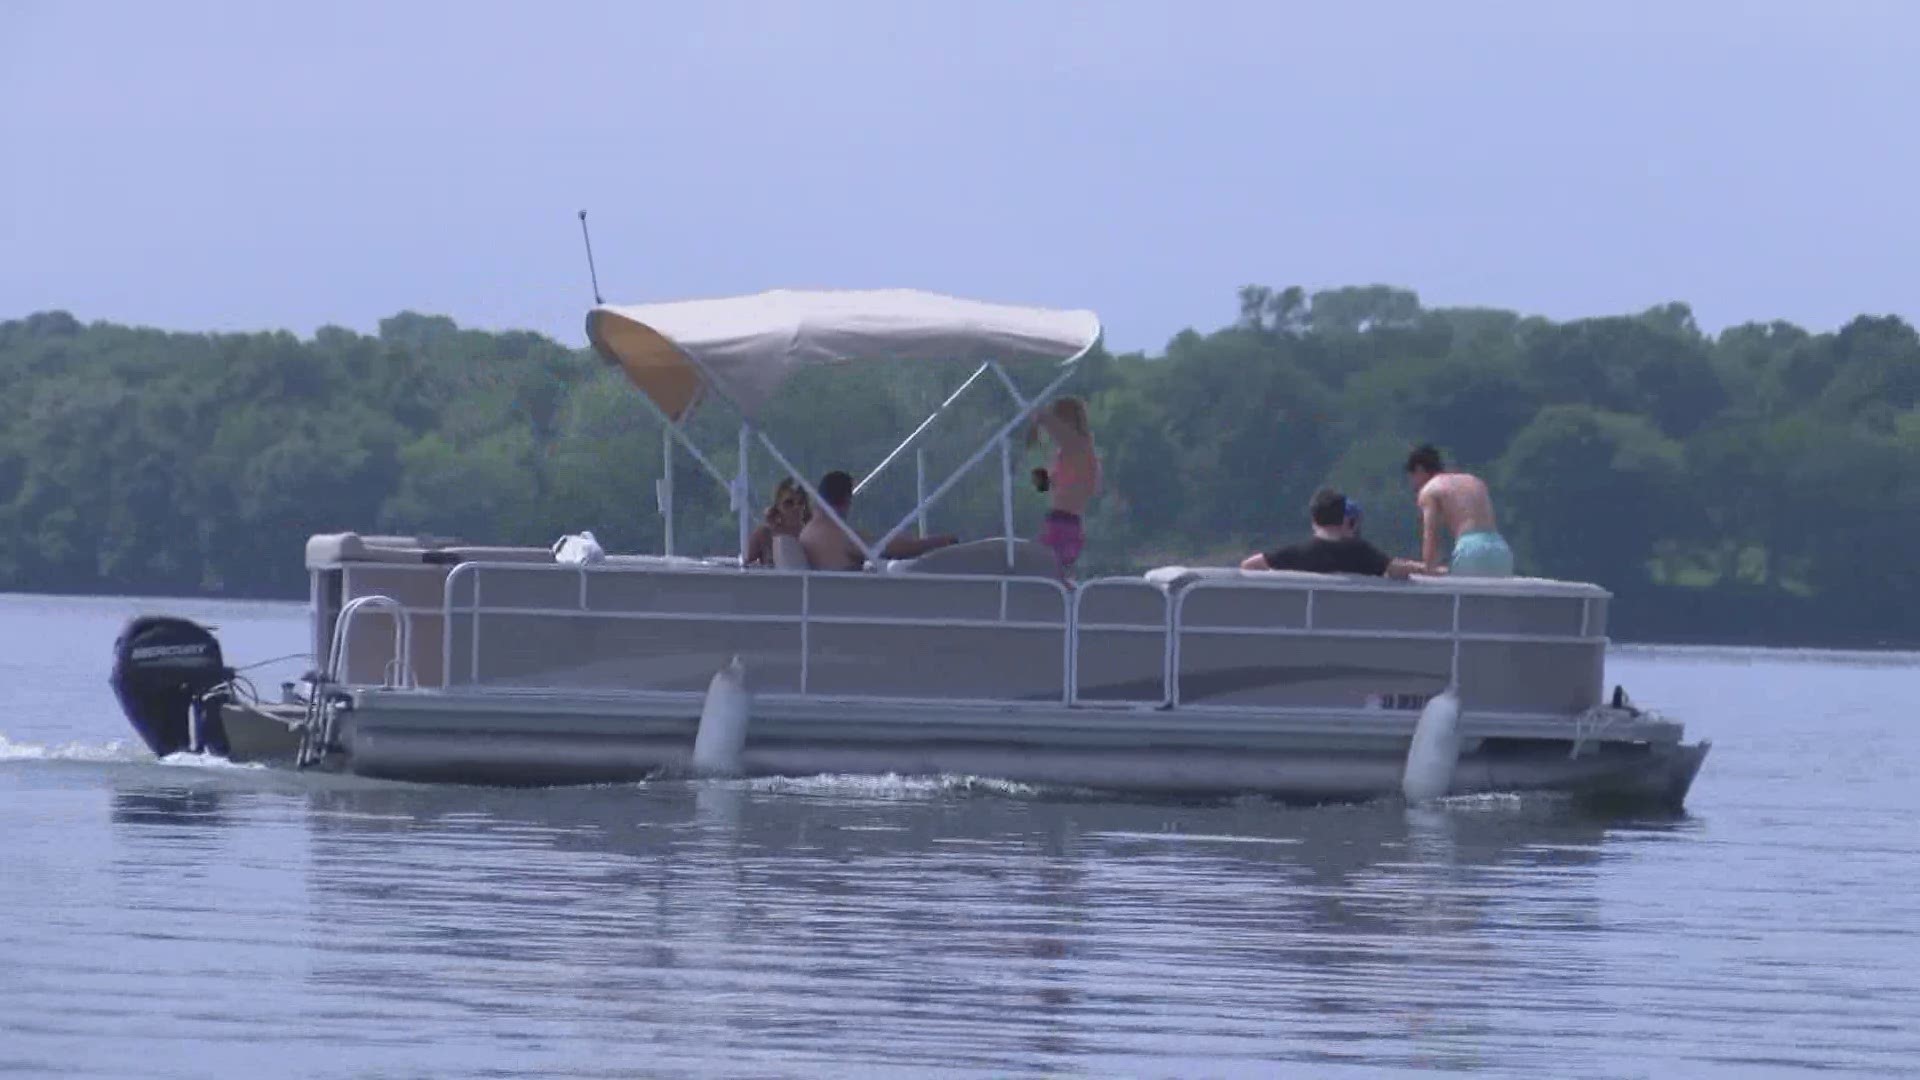 DNR on the lookout for social distancing, safety 4th of July weekend